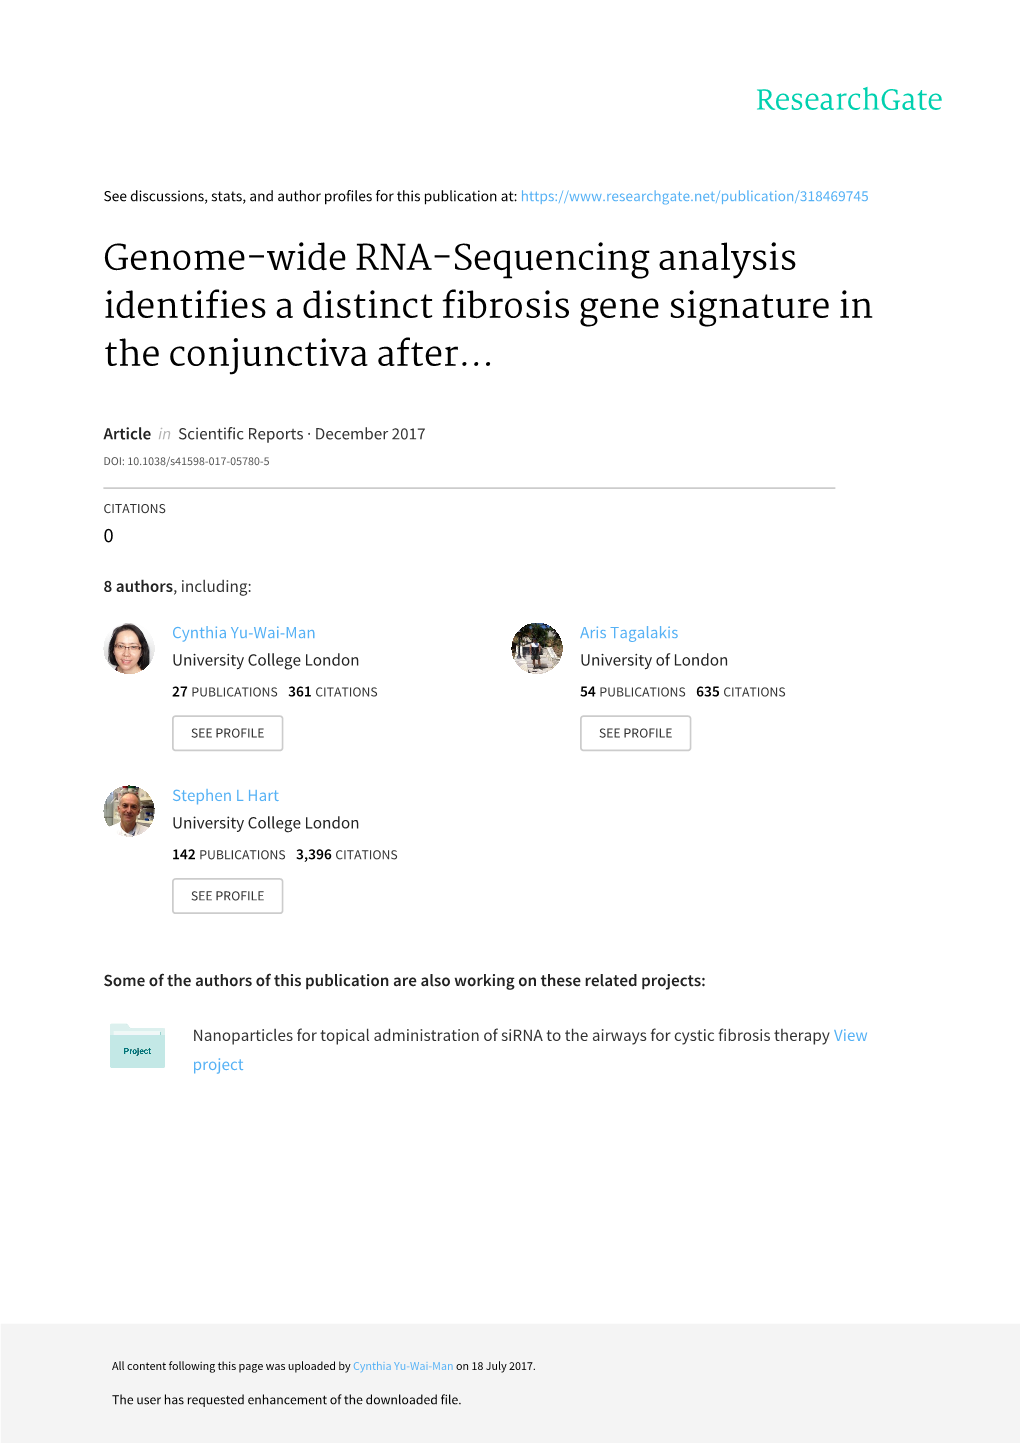 Genome-Wide RNA-Sequencing Analysis Identifies a Distinct Fibrosis Gene Signature in the Conjunctiva After